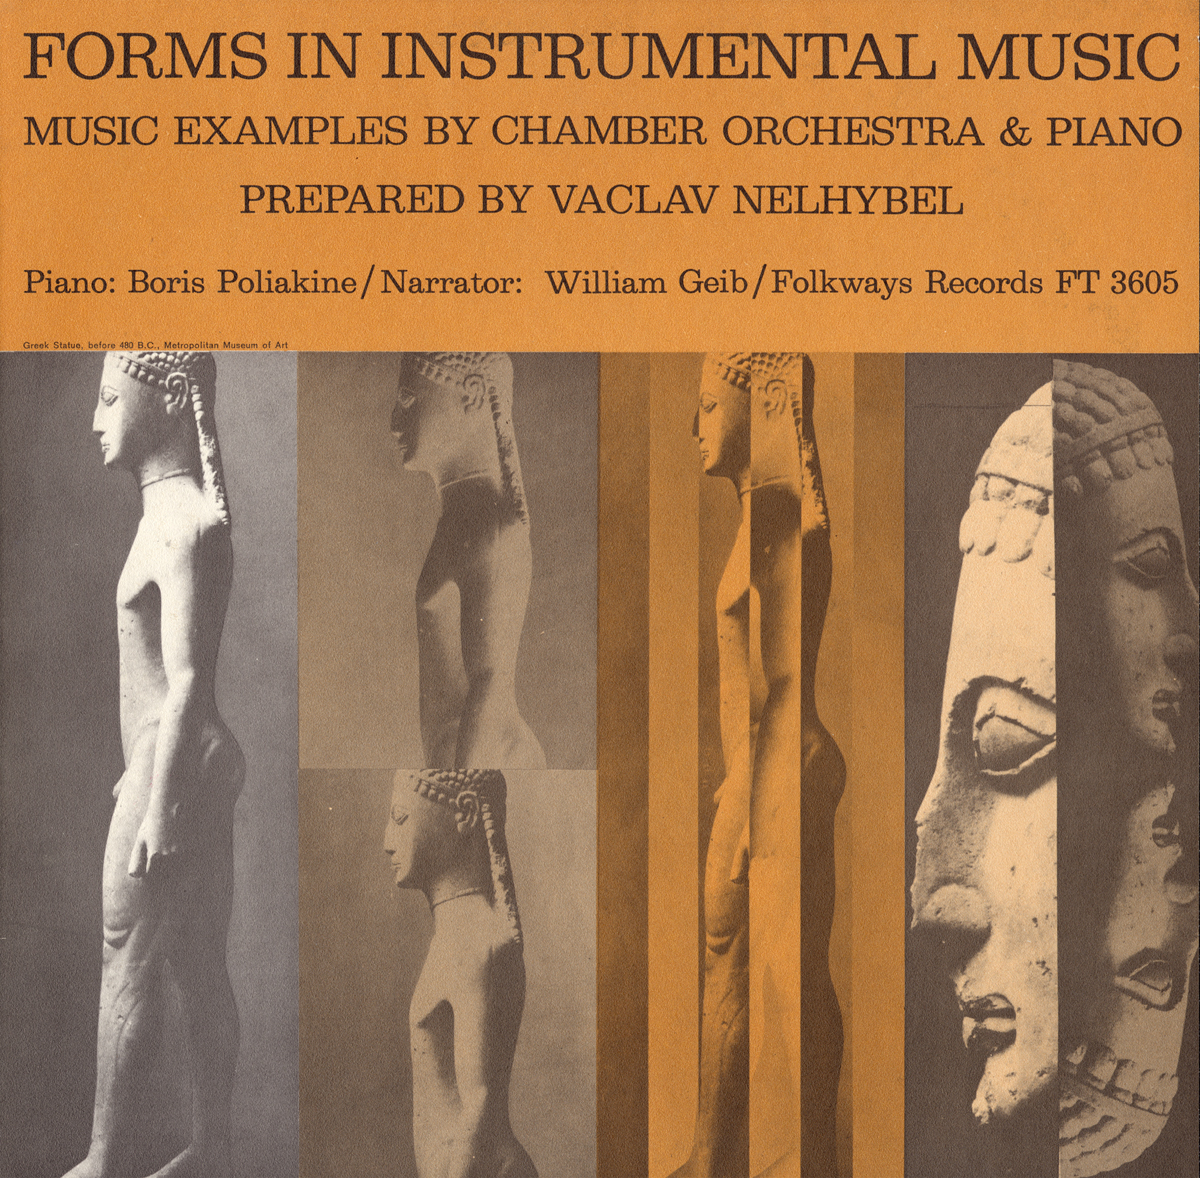 FORMS IN INSTRUMENTAL MUSIC: MUSIC EXAMPLES